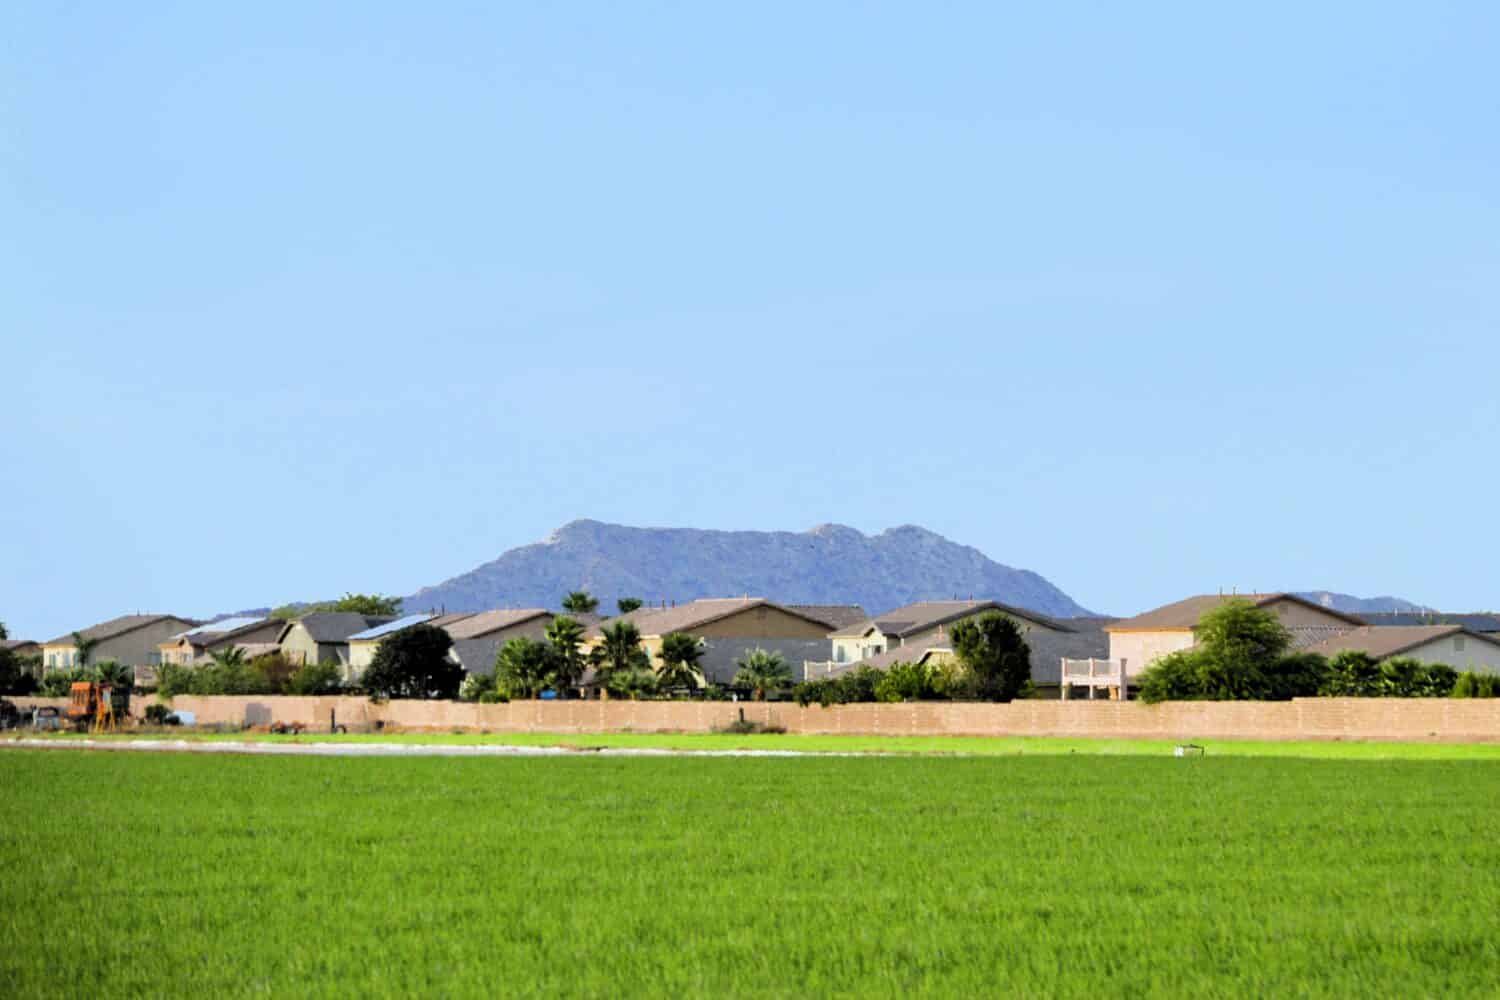 agricultural farm field next to home community with mountain in background, Maricopa Arizona